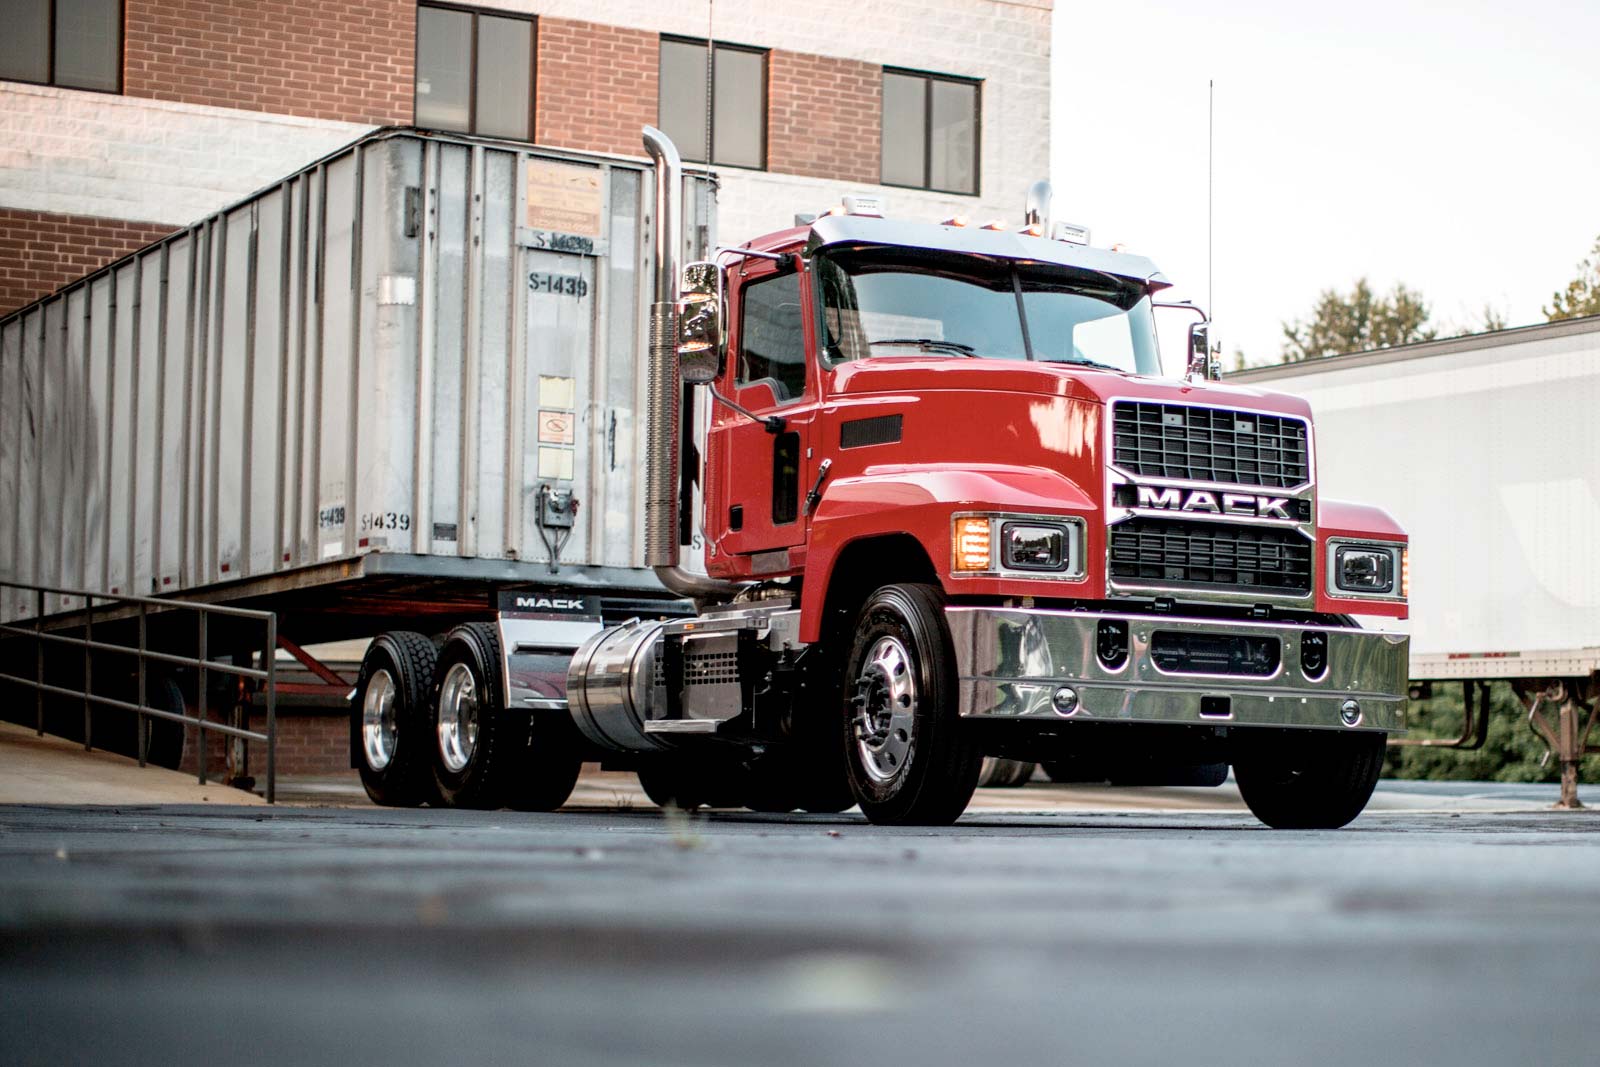  Mack  Trucks  Announces Booth Truck  Lineup for ExpoCam 